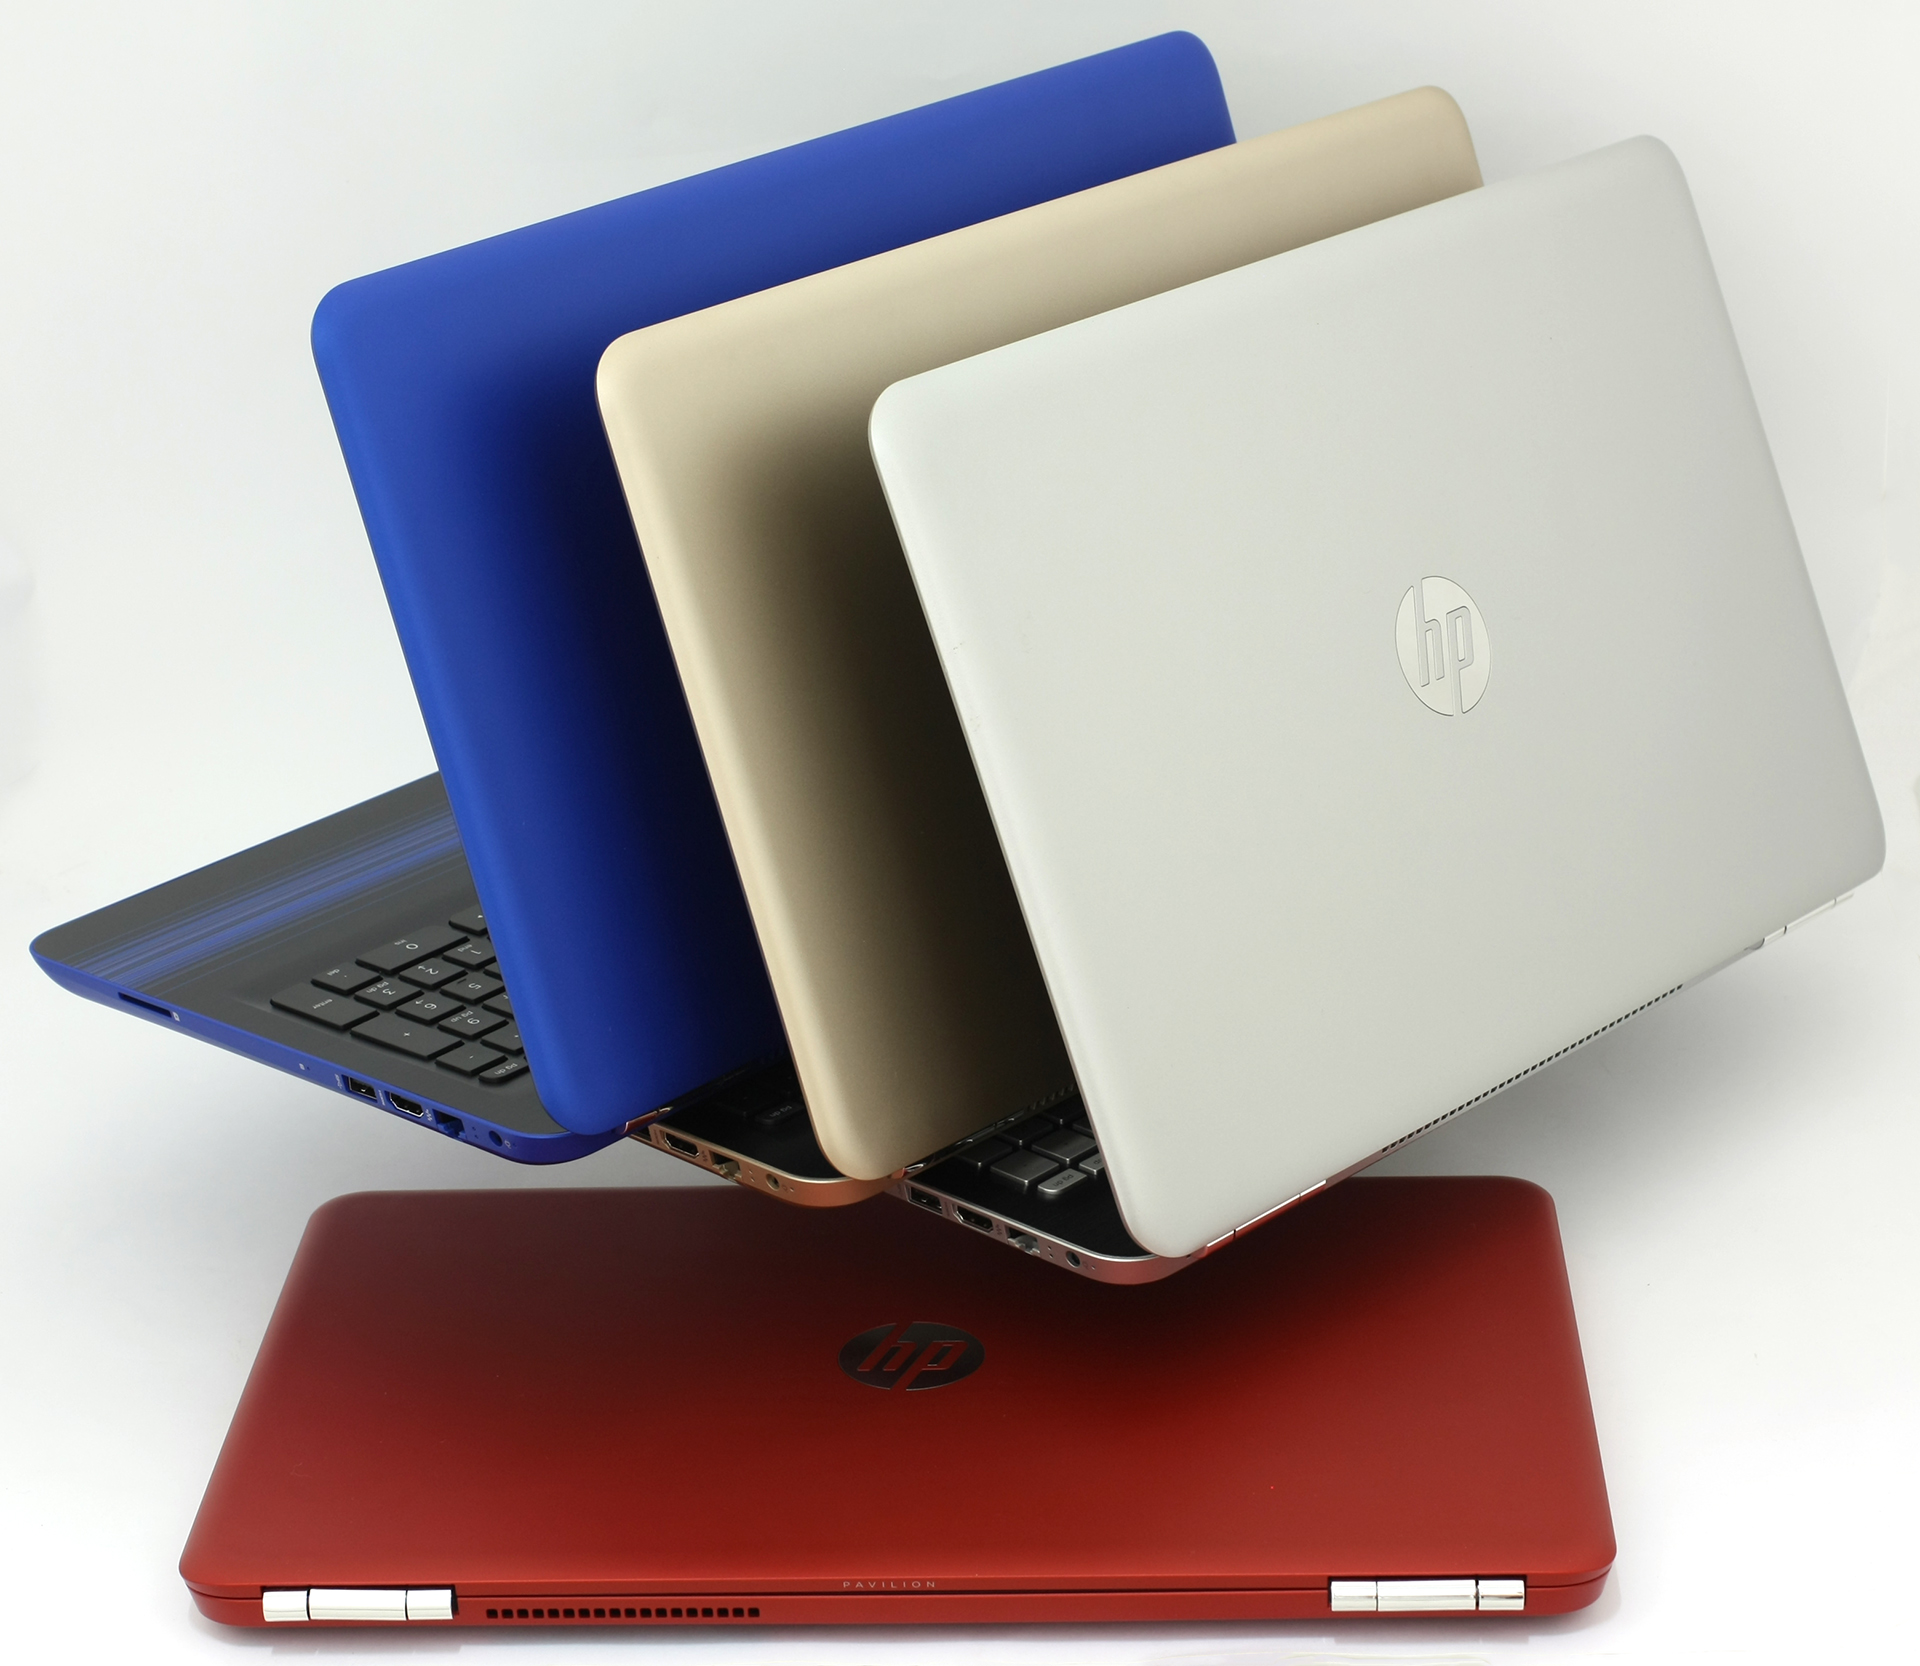 HP Pavilion 15 (2016) review - HP is stepping up its game with a